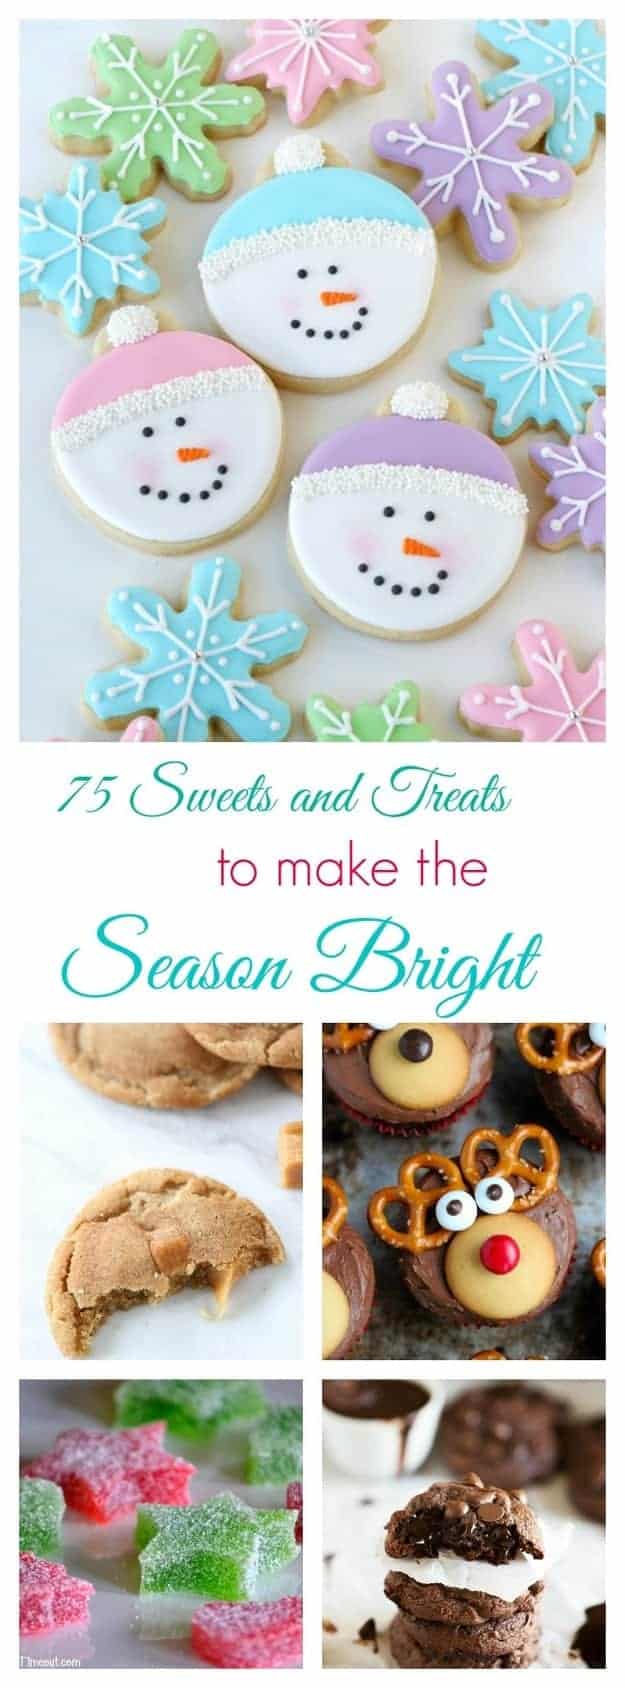 75 sweets and treats for the holidays in one place